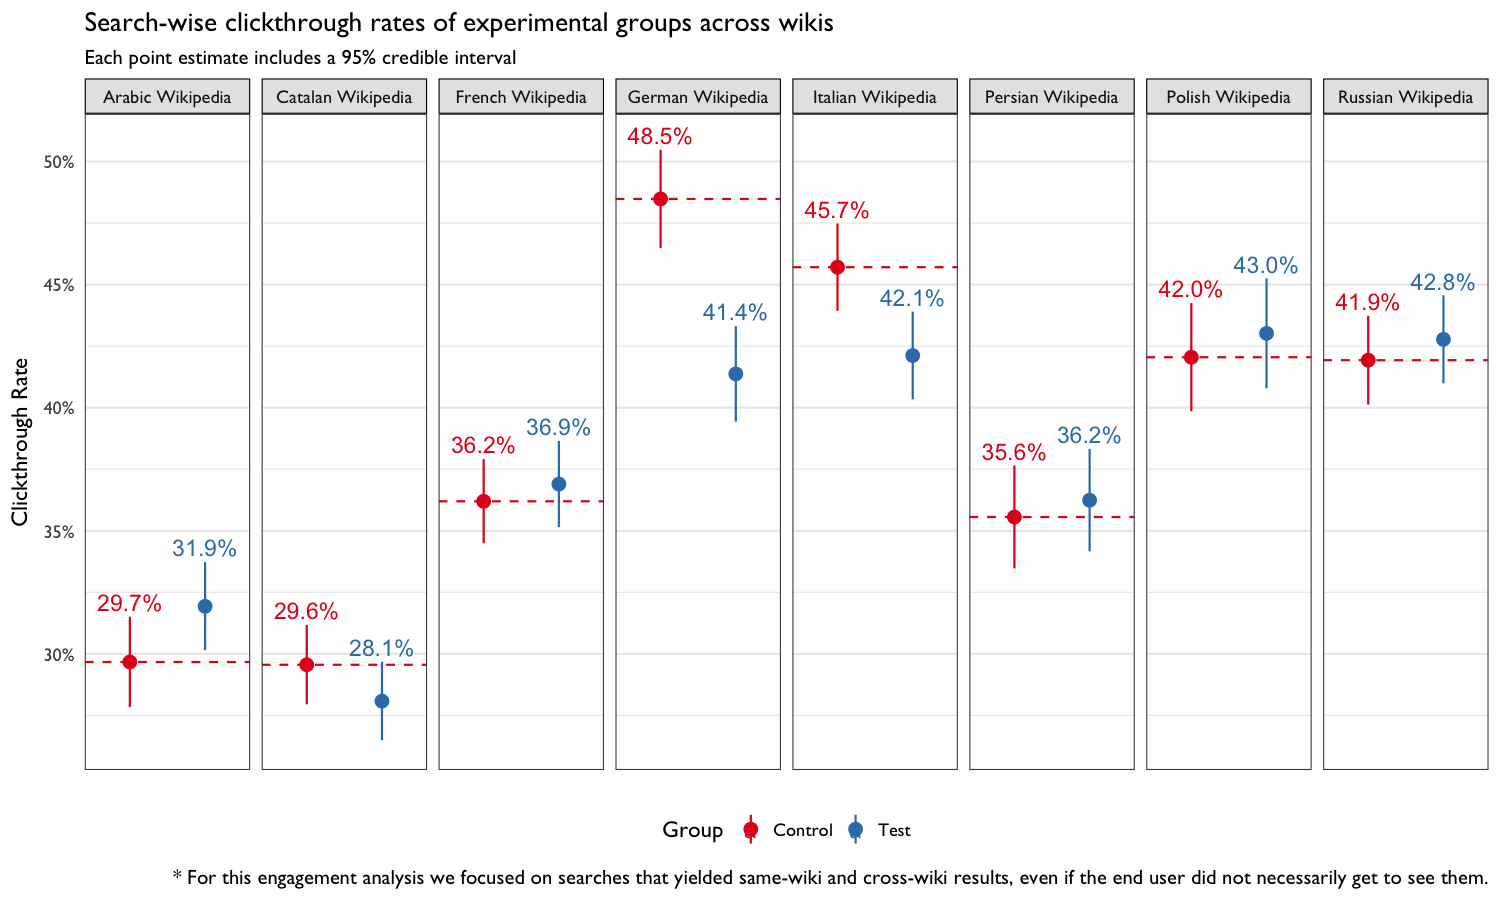 **Figure 6**: Clickthrough rates of experimental groups, split by wiki.